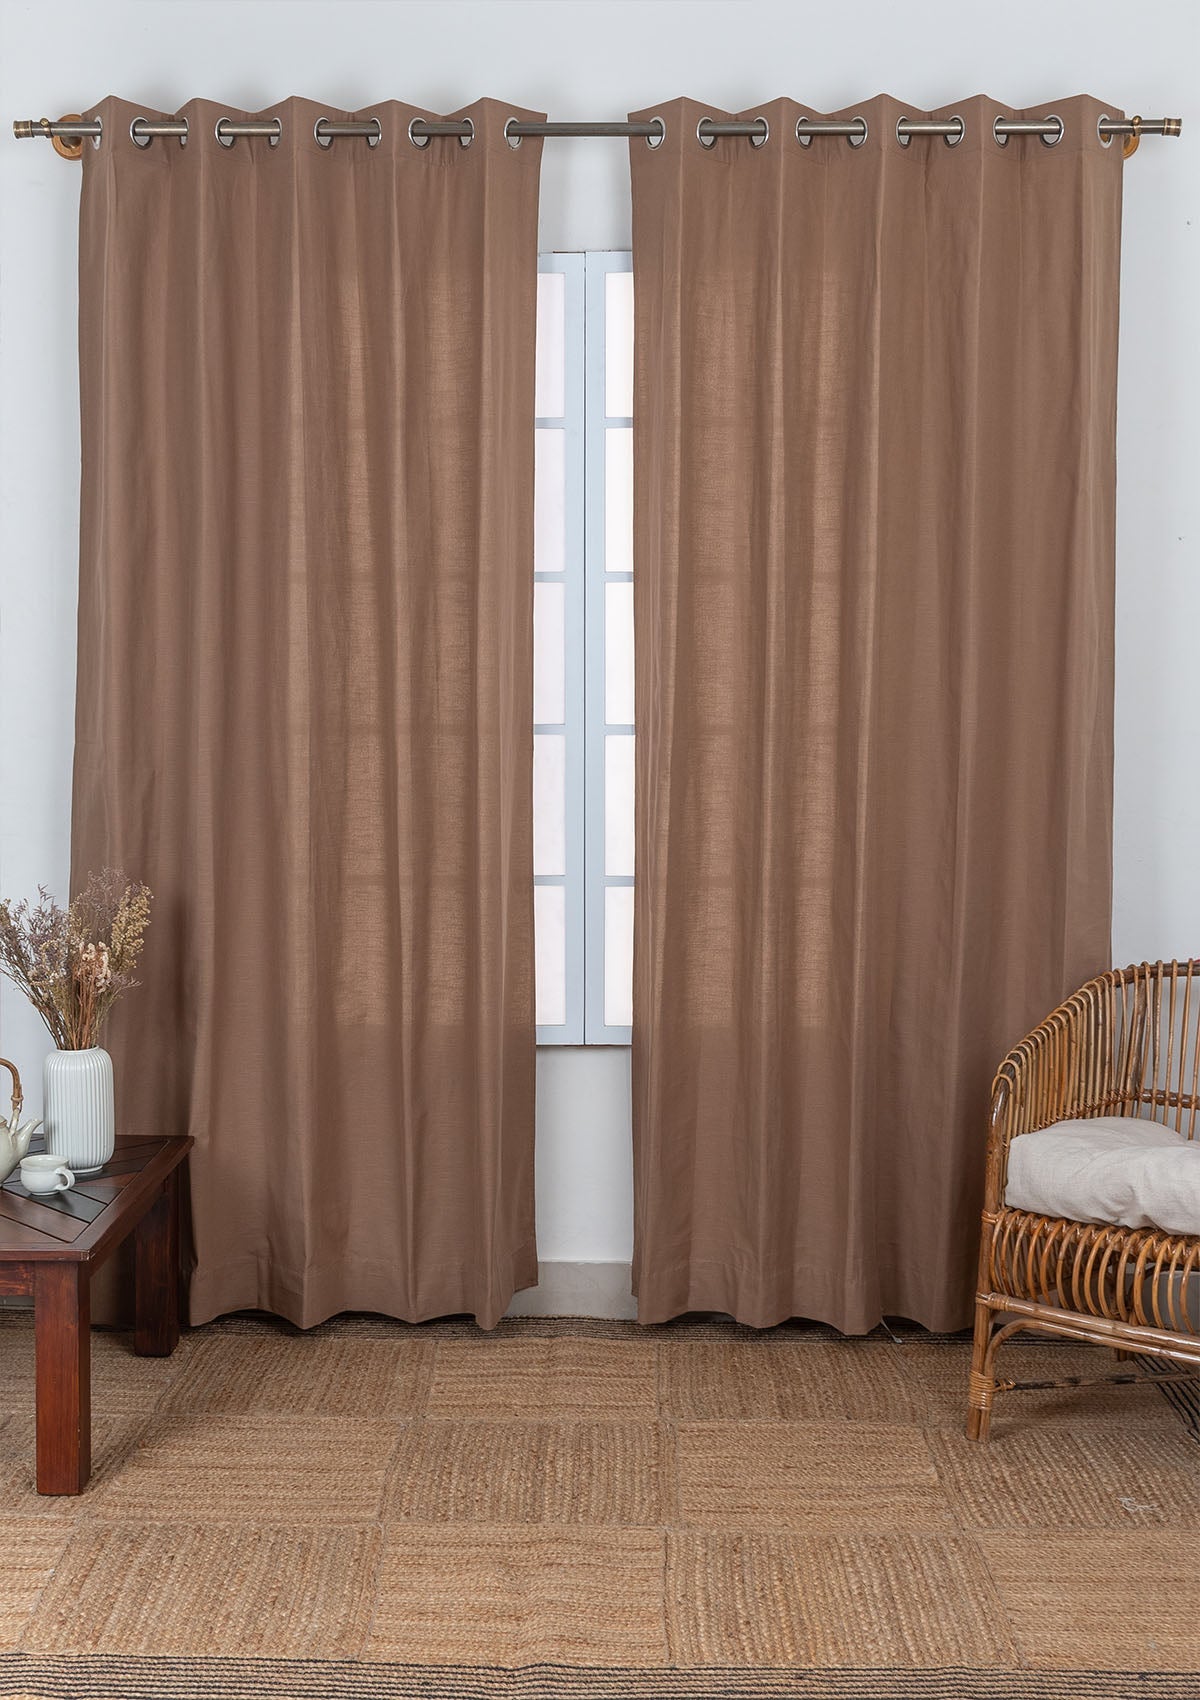 Solid chocolate brown 100% cotton plain customisable curtain for bedroom - Room darkening